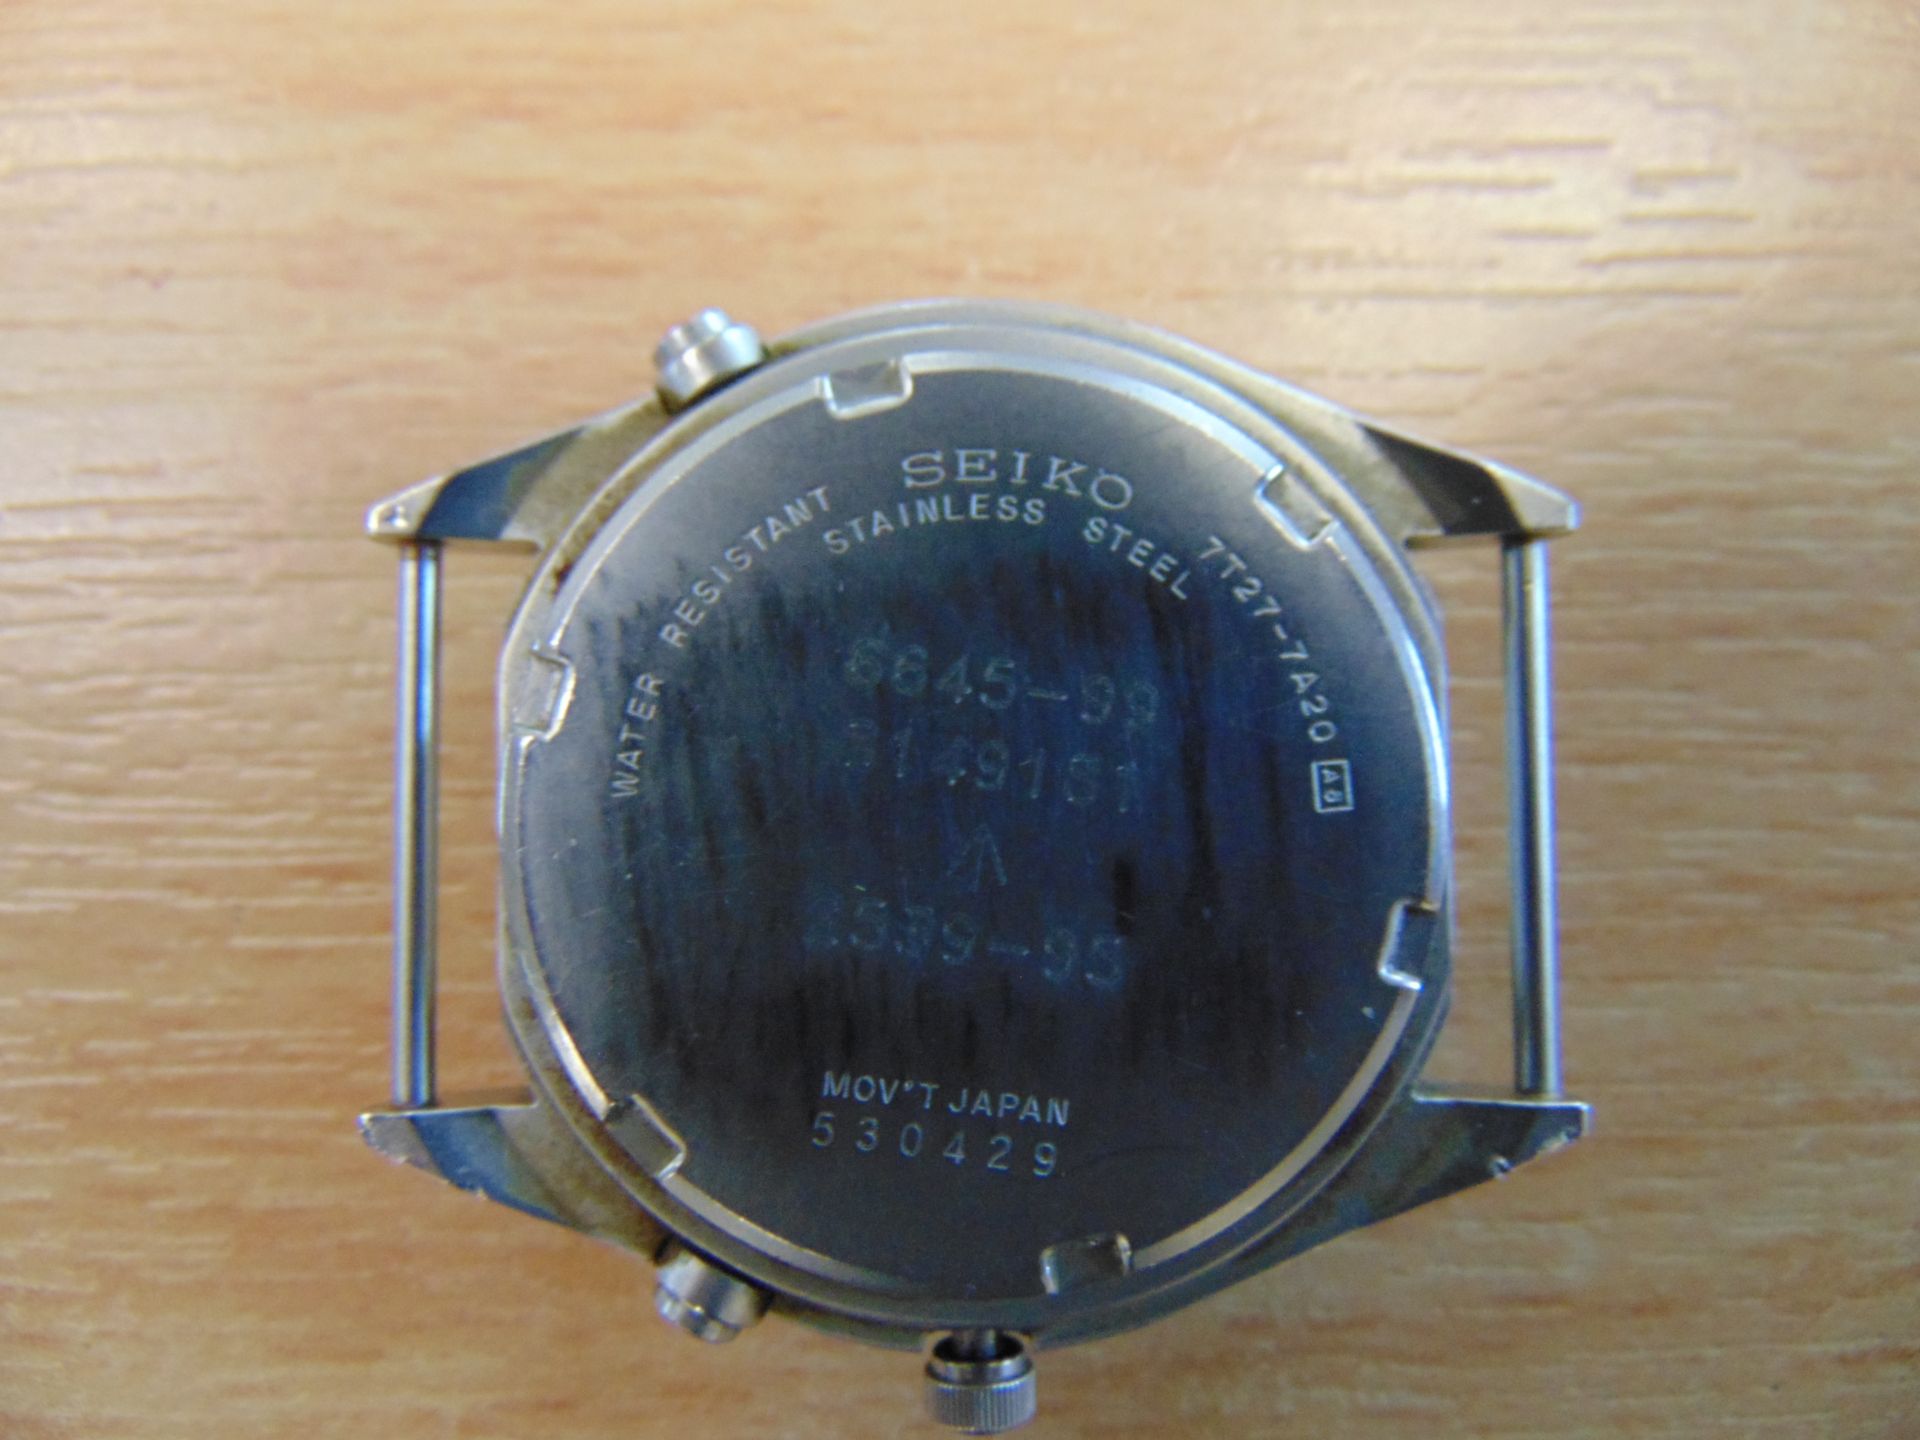 Seiko Gen 2 Pilots Chrono with Date, RAF Tornado Force Issue, Nato Marks, Date 1995 - Image 4 of 6